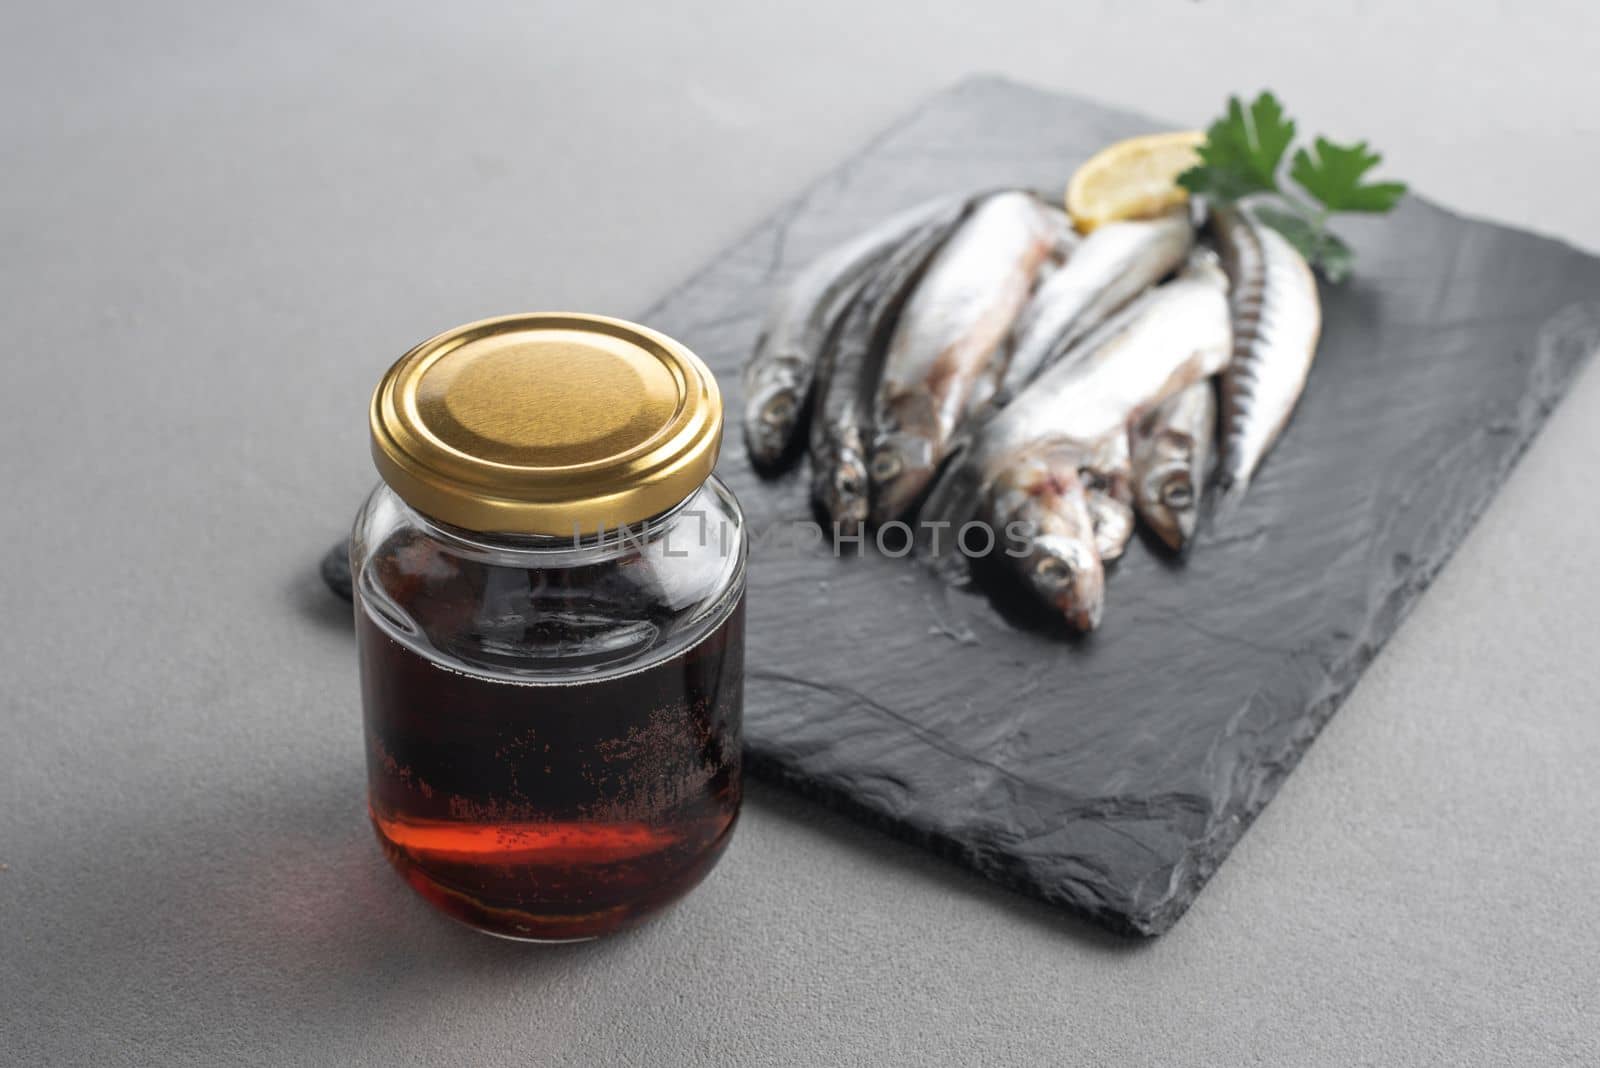 Garum is a fermented fish sauce. Prepared by fermentation from fish, salted garum sauce in a bottle on a gray background. Garum fish sauce made from anchovies on the grey background.